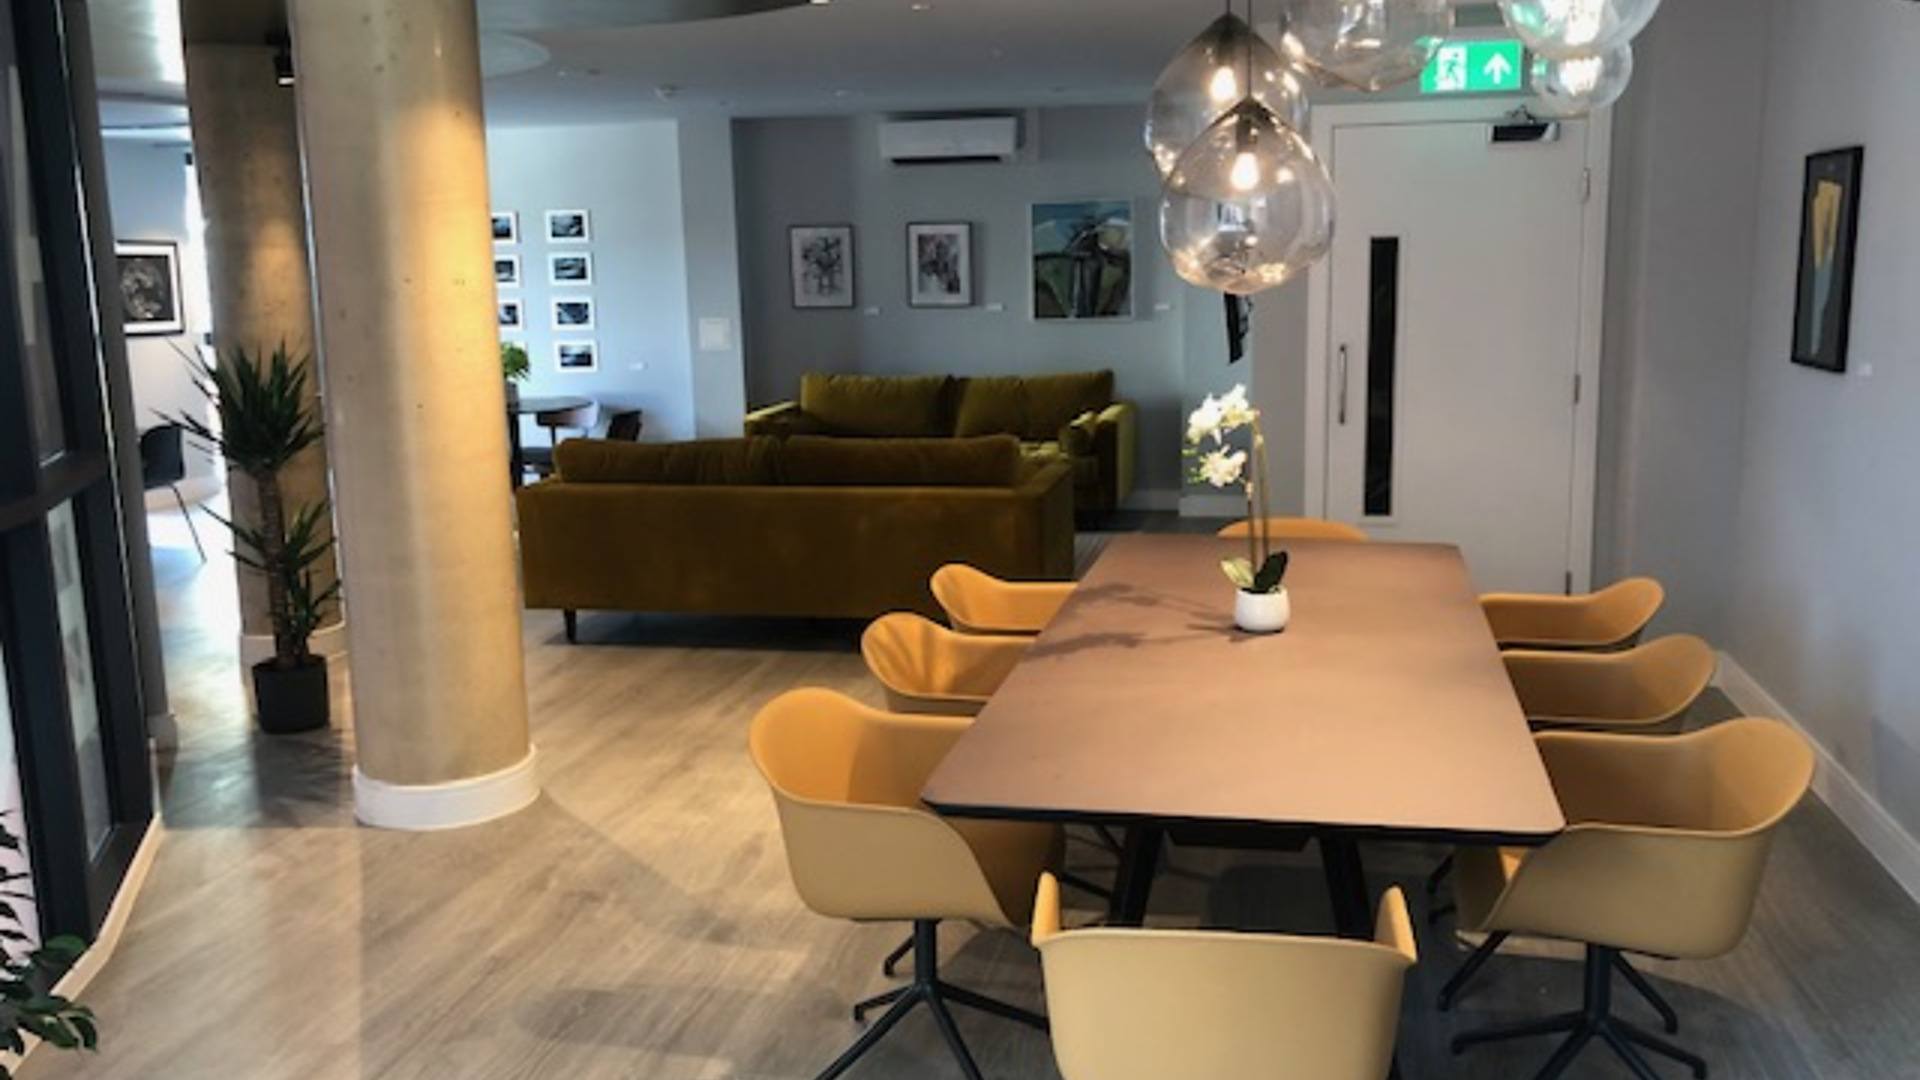 Apartments to Rent by Savills at Wembley Central, Brent, HA1, communal lounge area